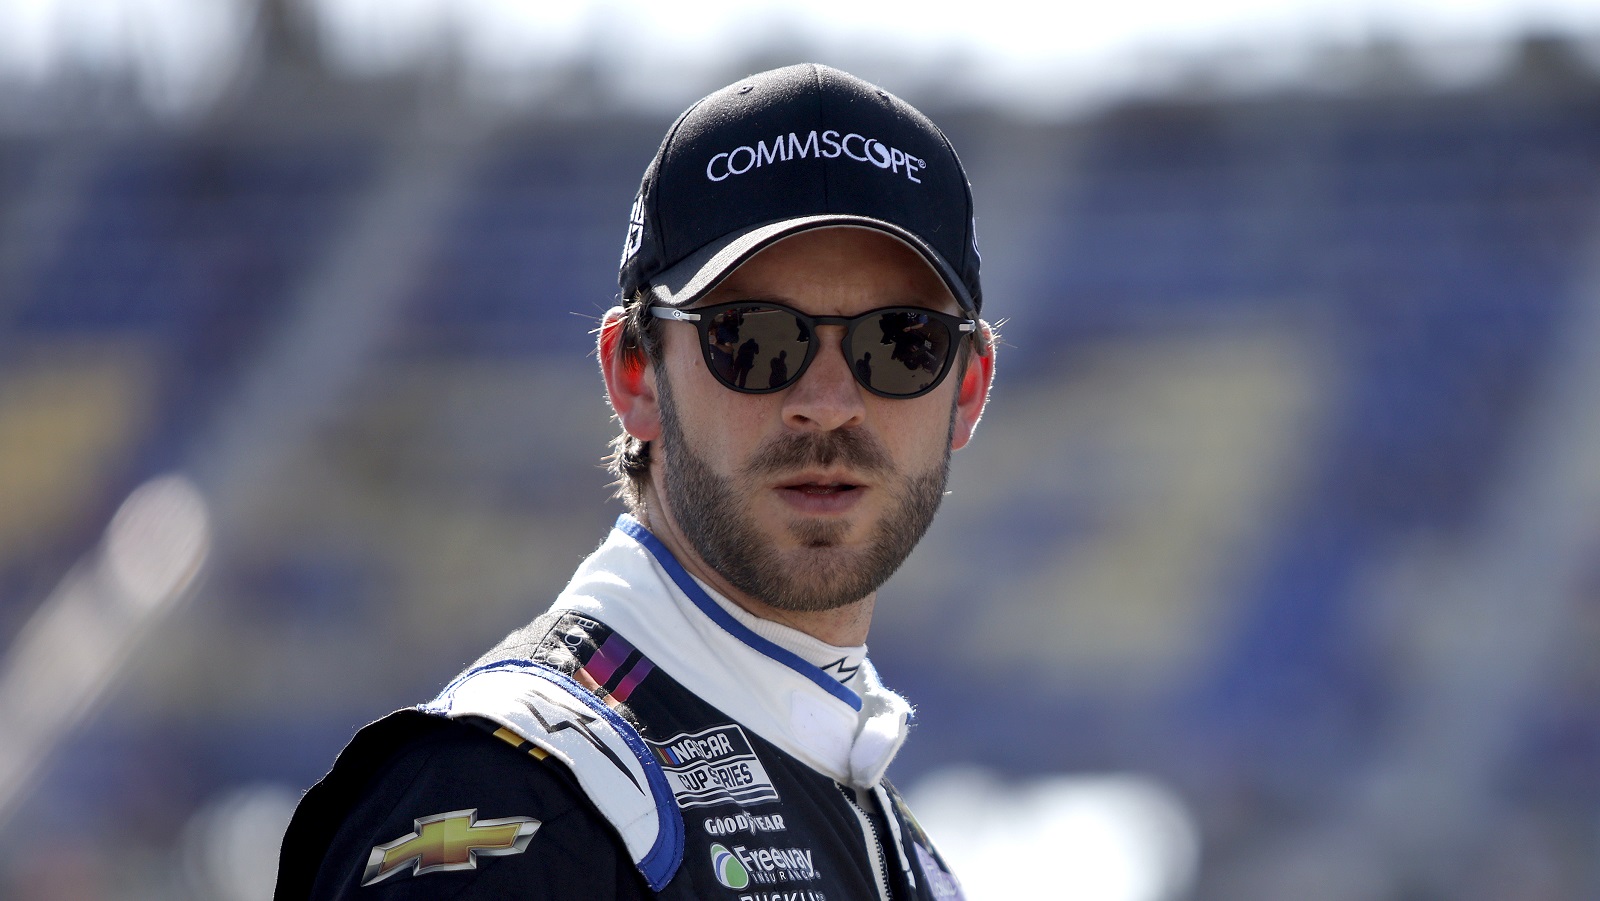 Daniel Suarez looks on during practice for the NASCAR Cup Series AdventHealth 400 at Kansas Speedway on May 14, 2022 in Kansas City, Kansas. | Sean Gardner/Getty Images